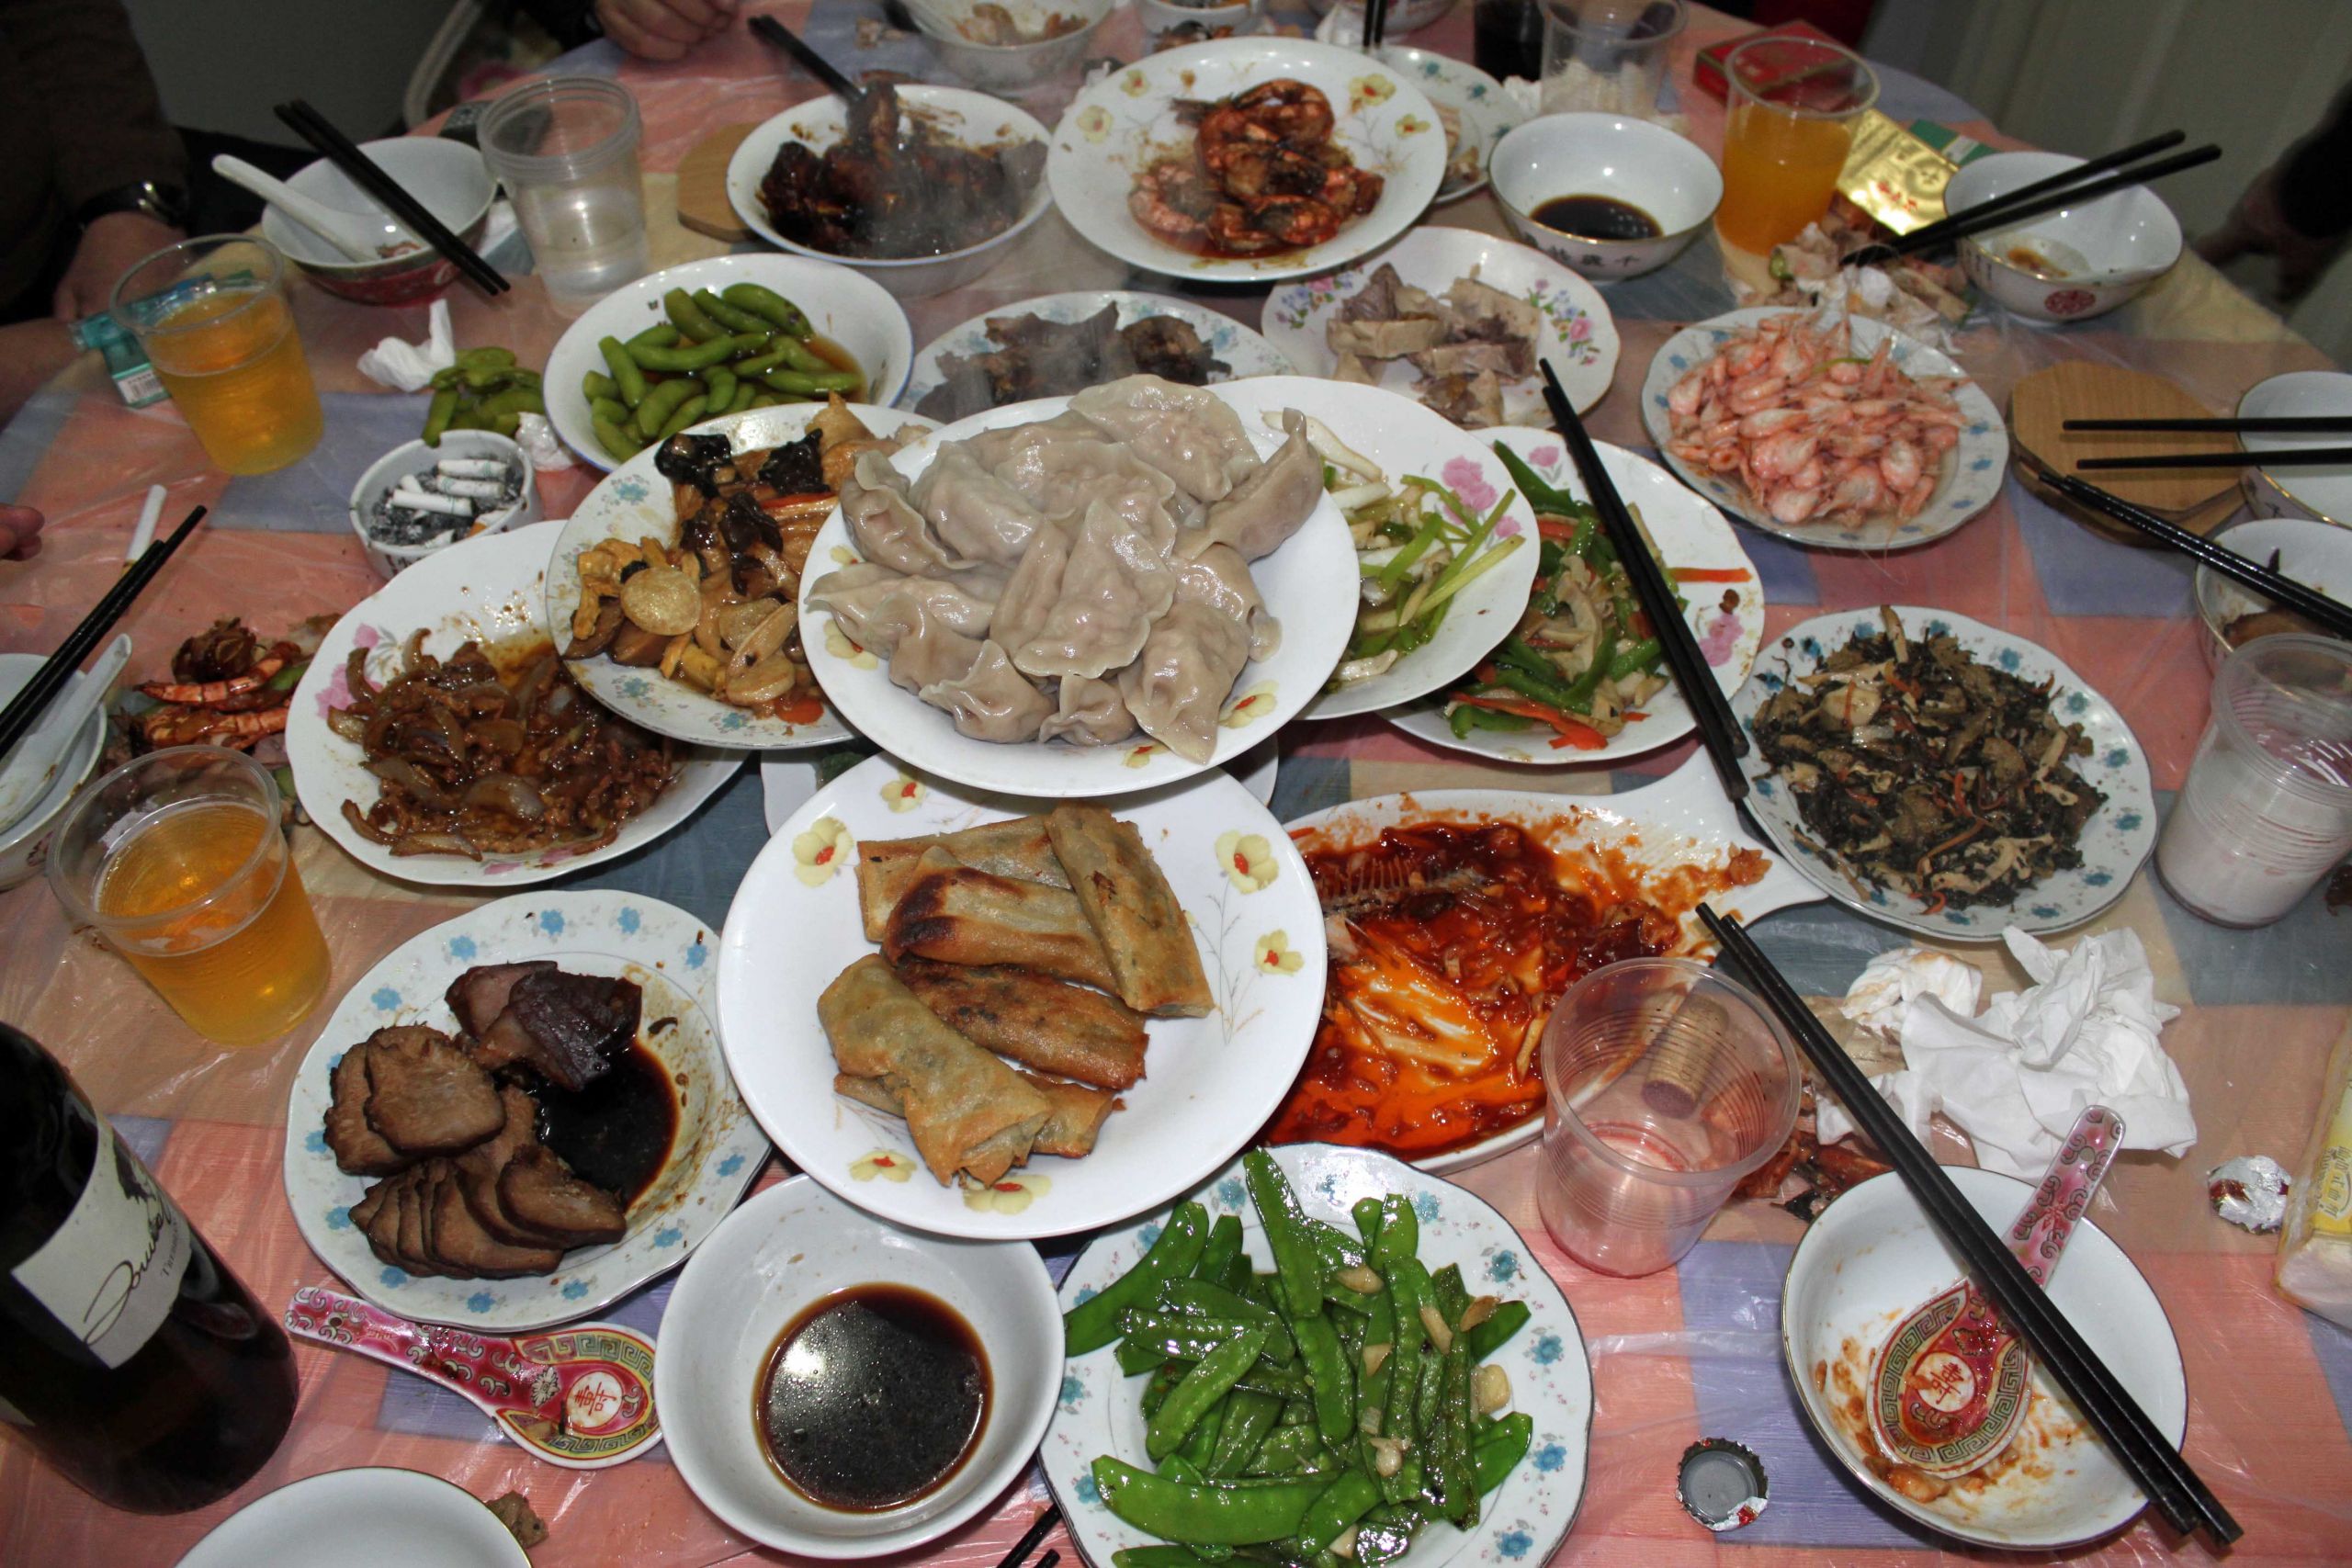 Best New Years Eve Dinners
 新年快乐 Xin Nian Kuai le Happy Chinese New Year